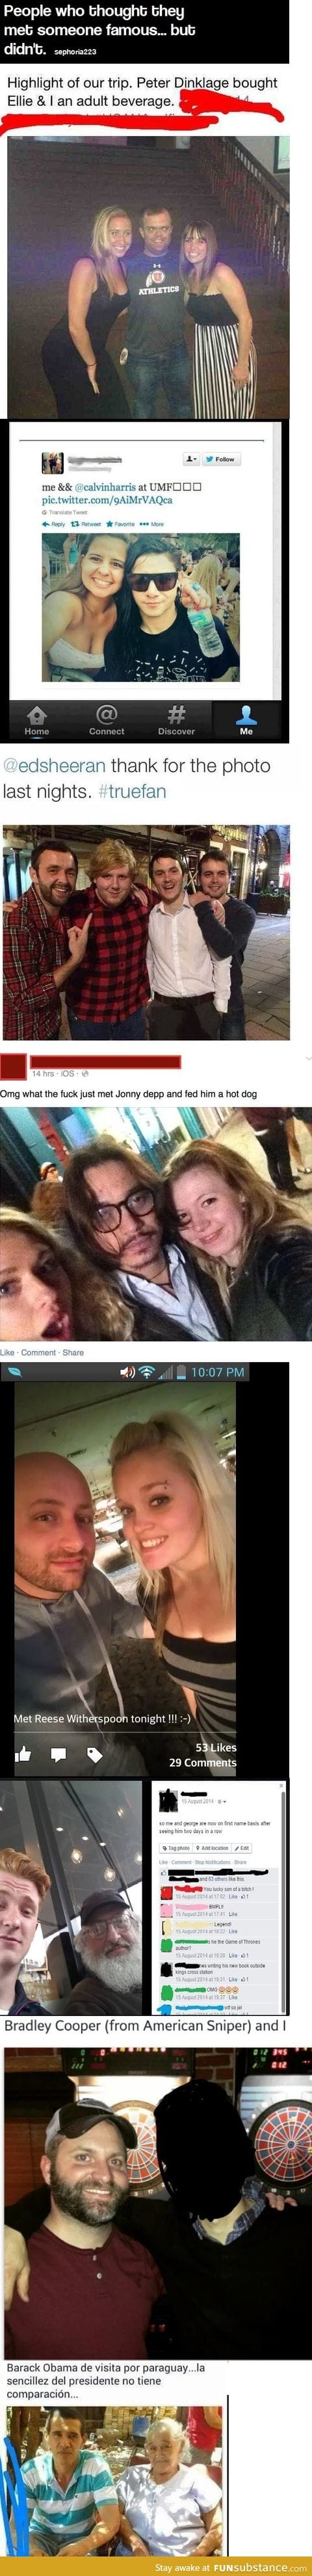 people who thought they met celebrities (except for the skrillex one)